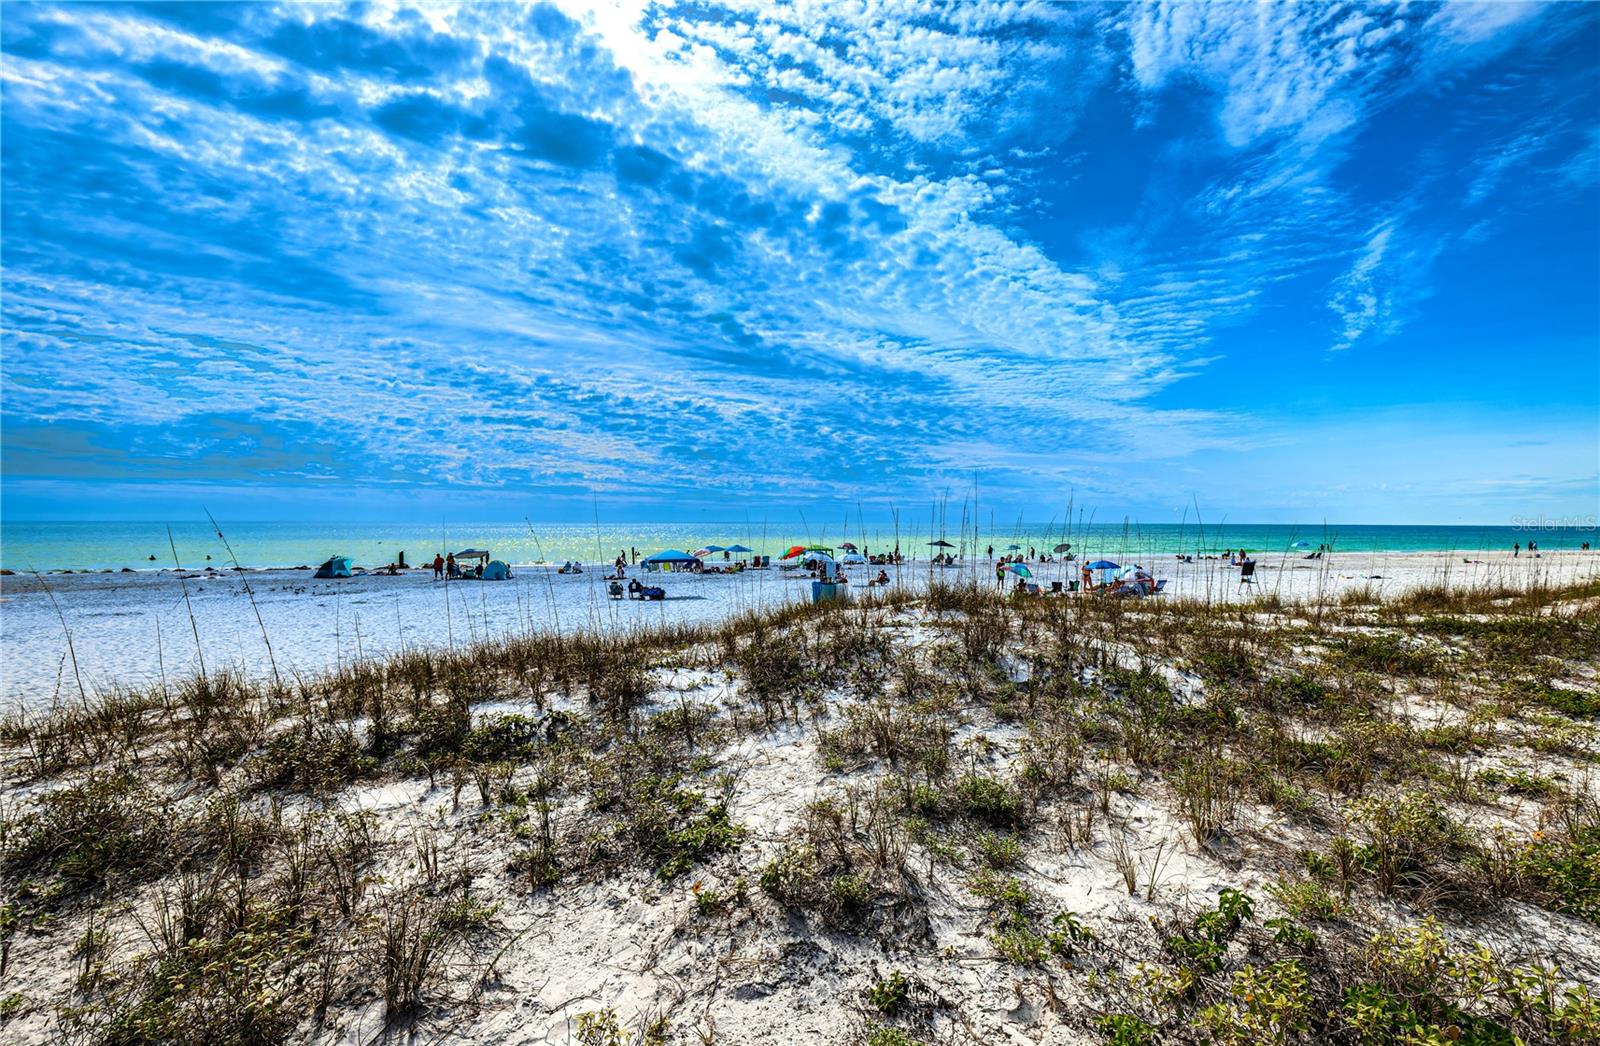 The sandy shores of the Gulf awaits you